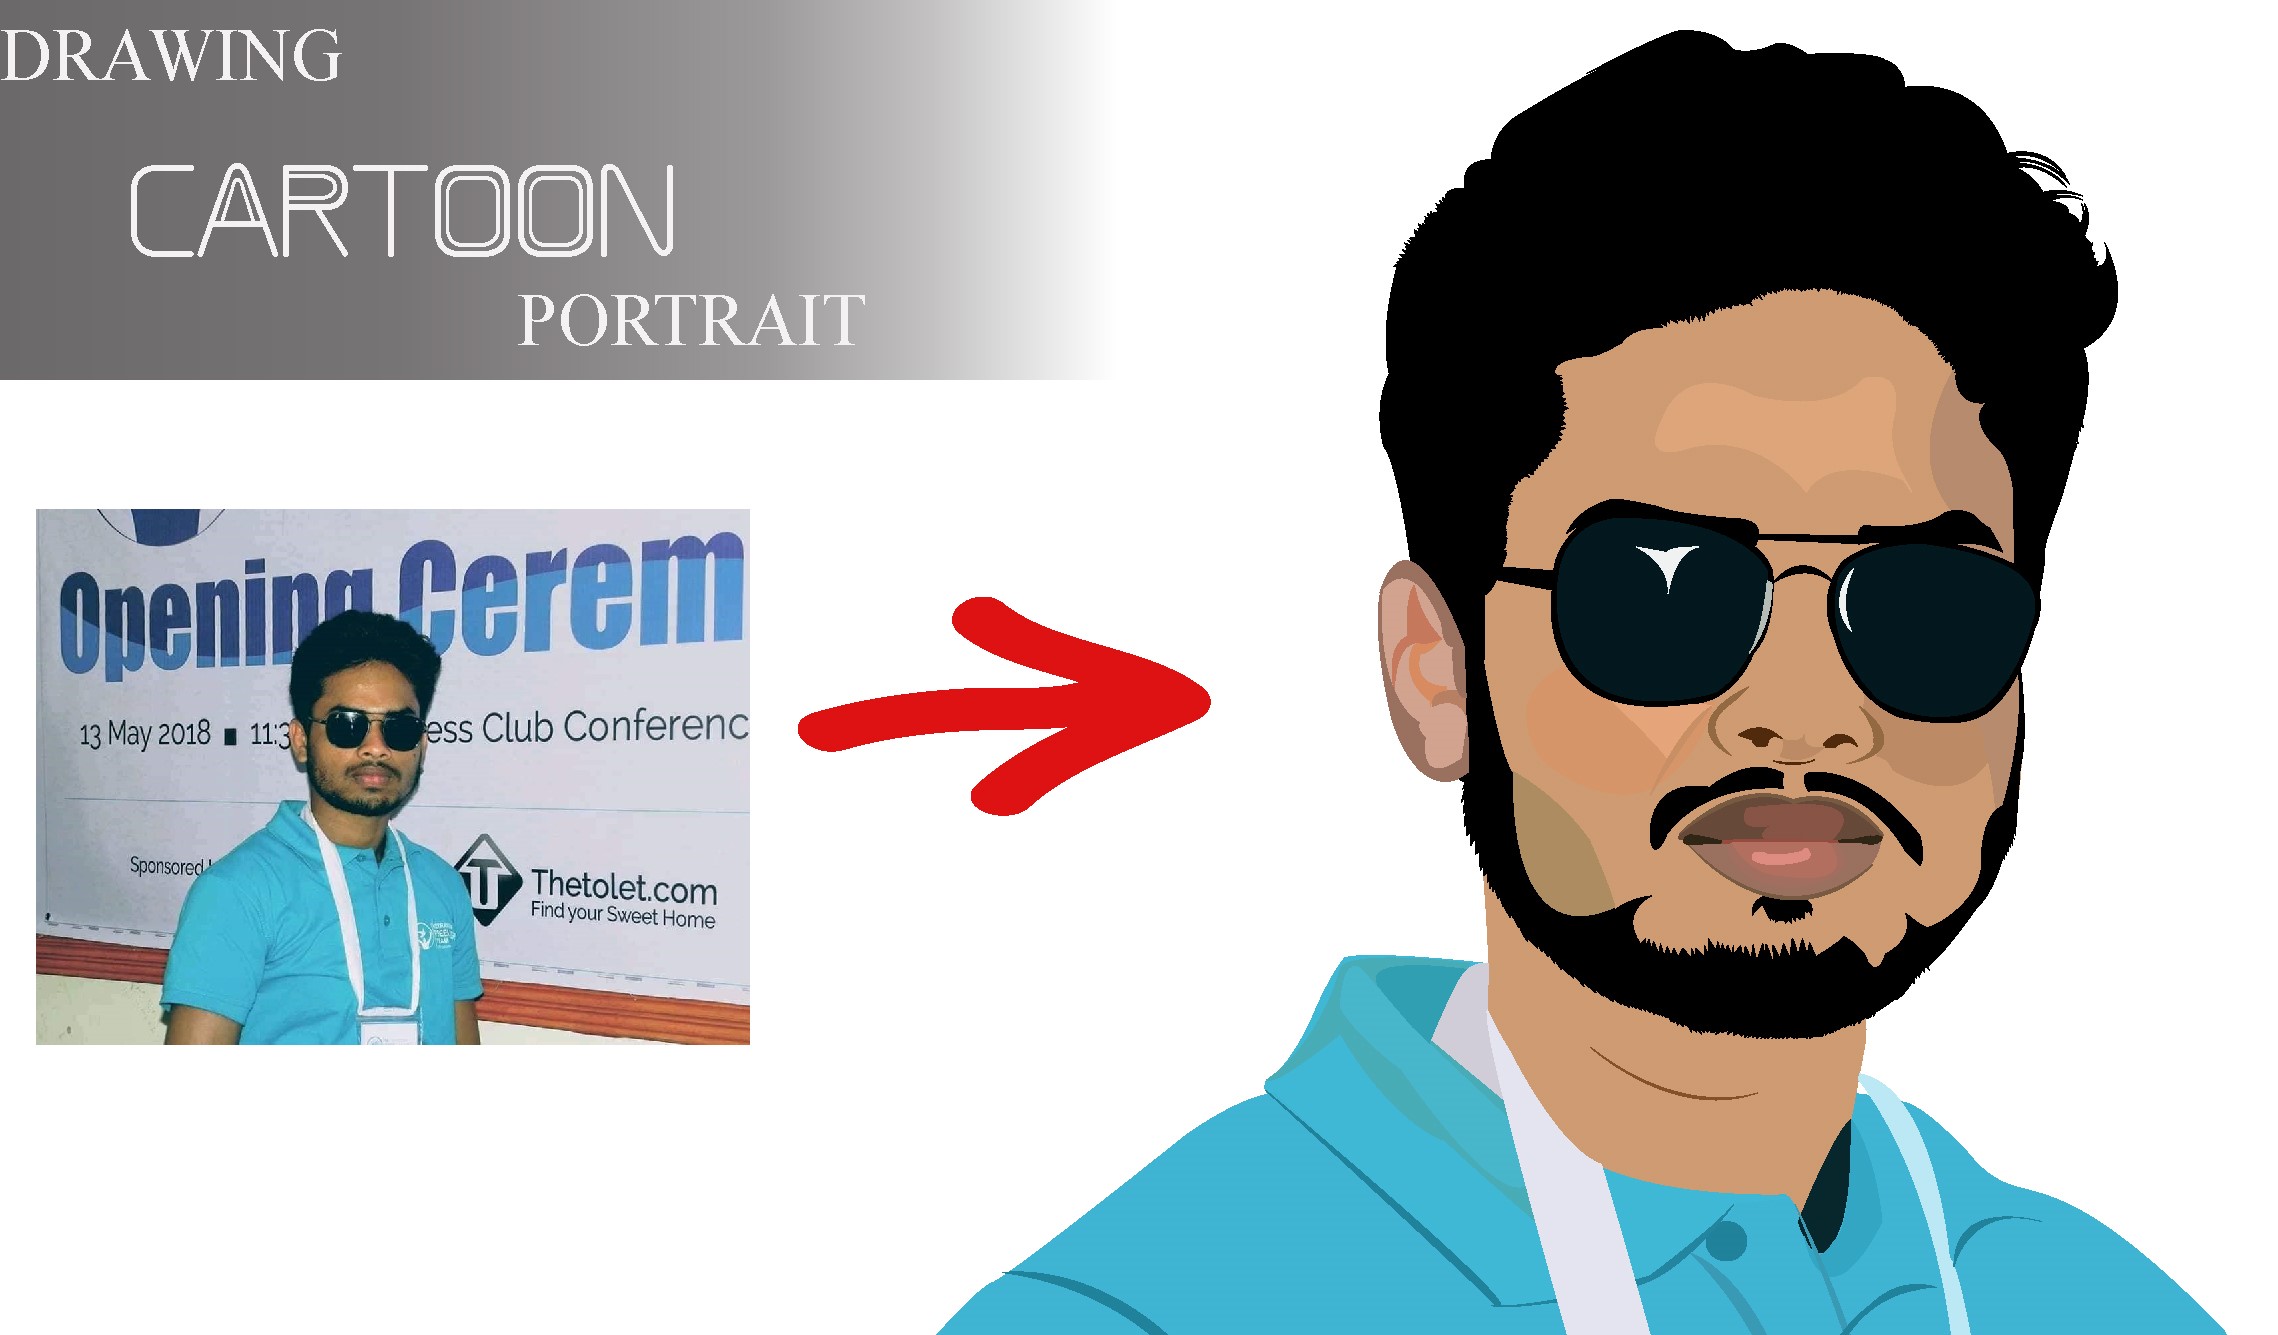 image to vector, vector art and cartoon portrait for $5 - SEOClerks